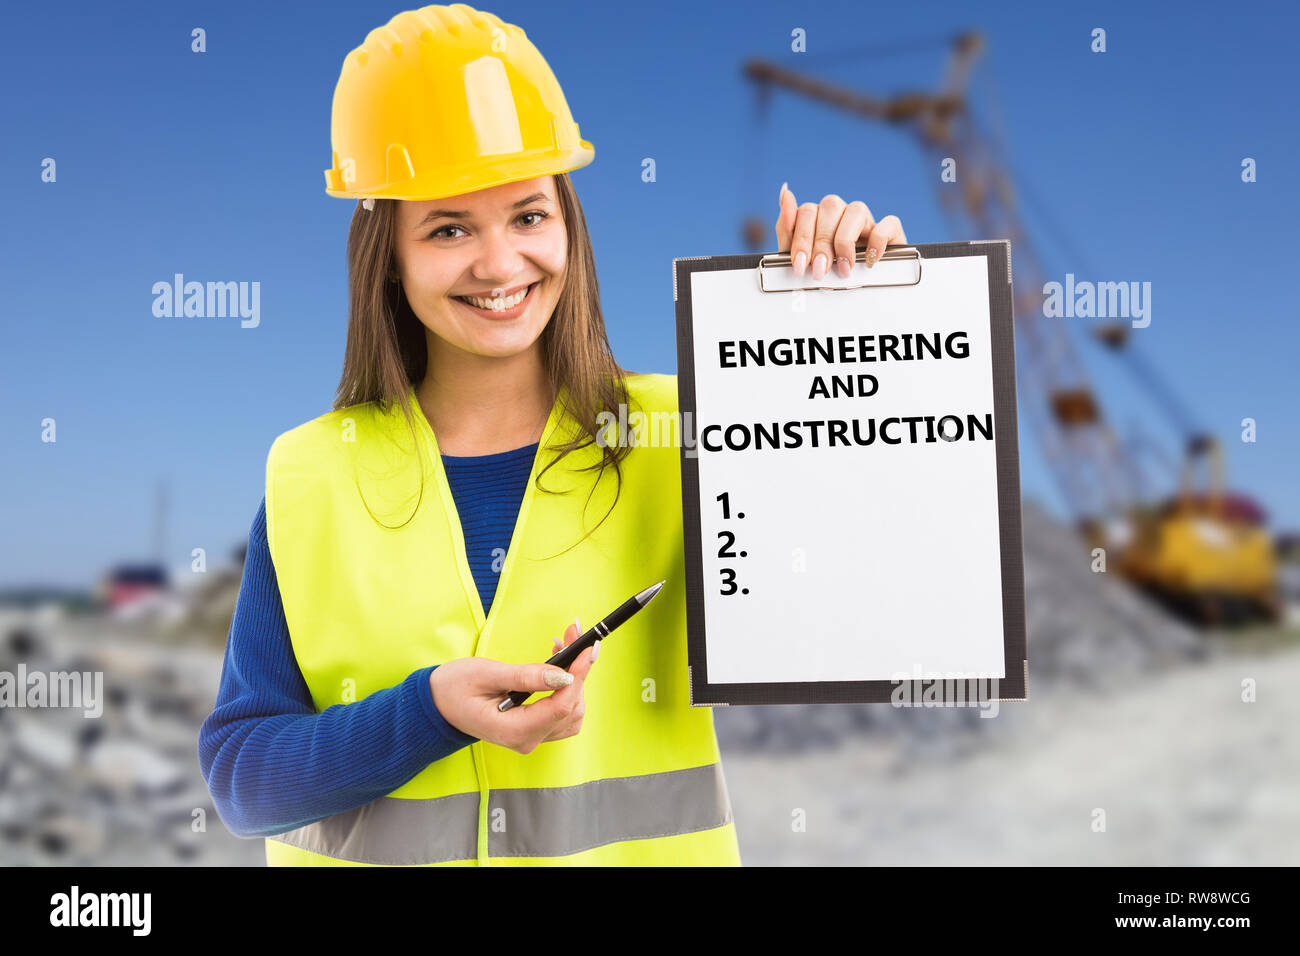 Builder woman wearing work attire and safety hardhat showing clipboard with numbered list having engineering and construction title Stock Photo